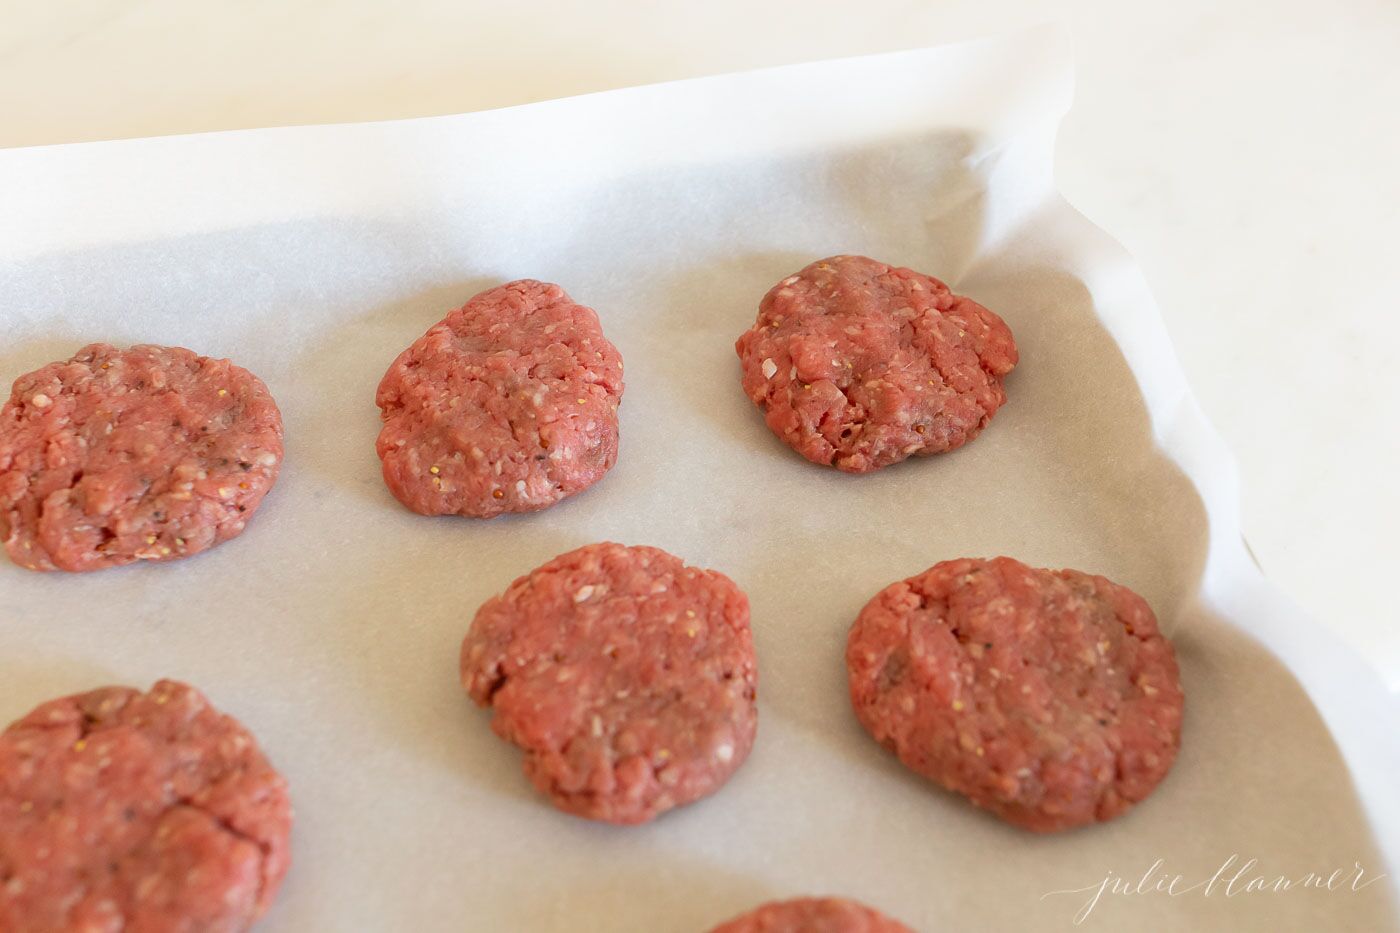 Raw beef, sliders getting ready to go into oven on parchment paper.